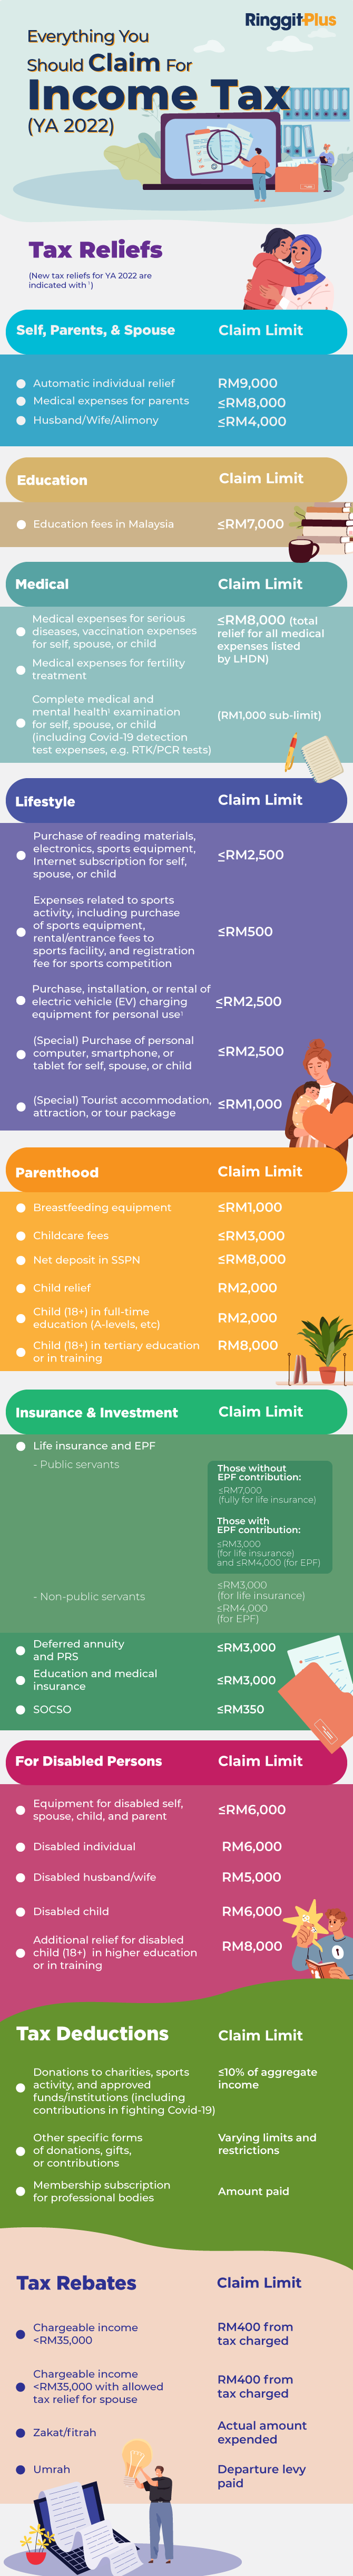 Company Tax Relief 2023 Malaysia Printable Forms Free Online